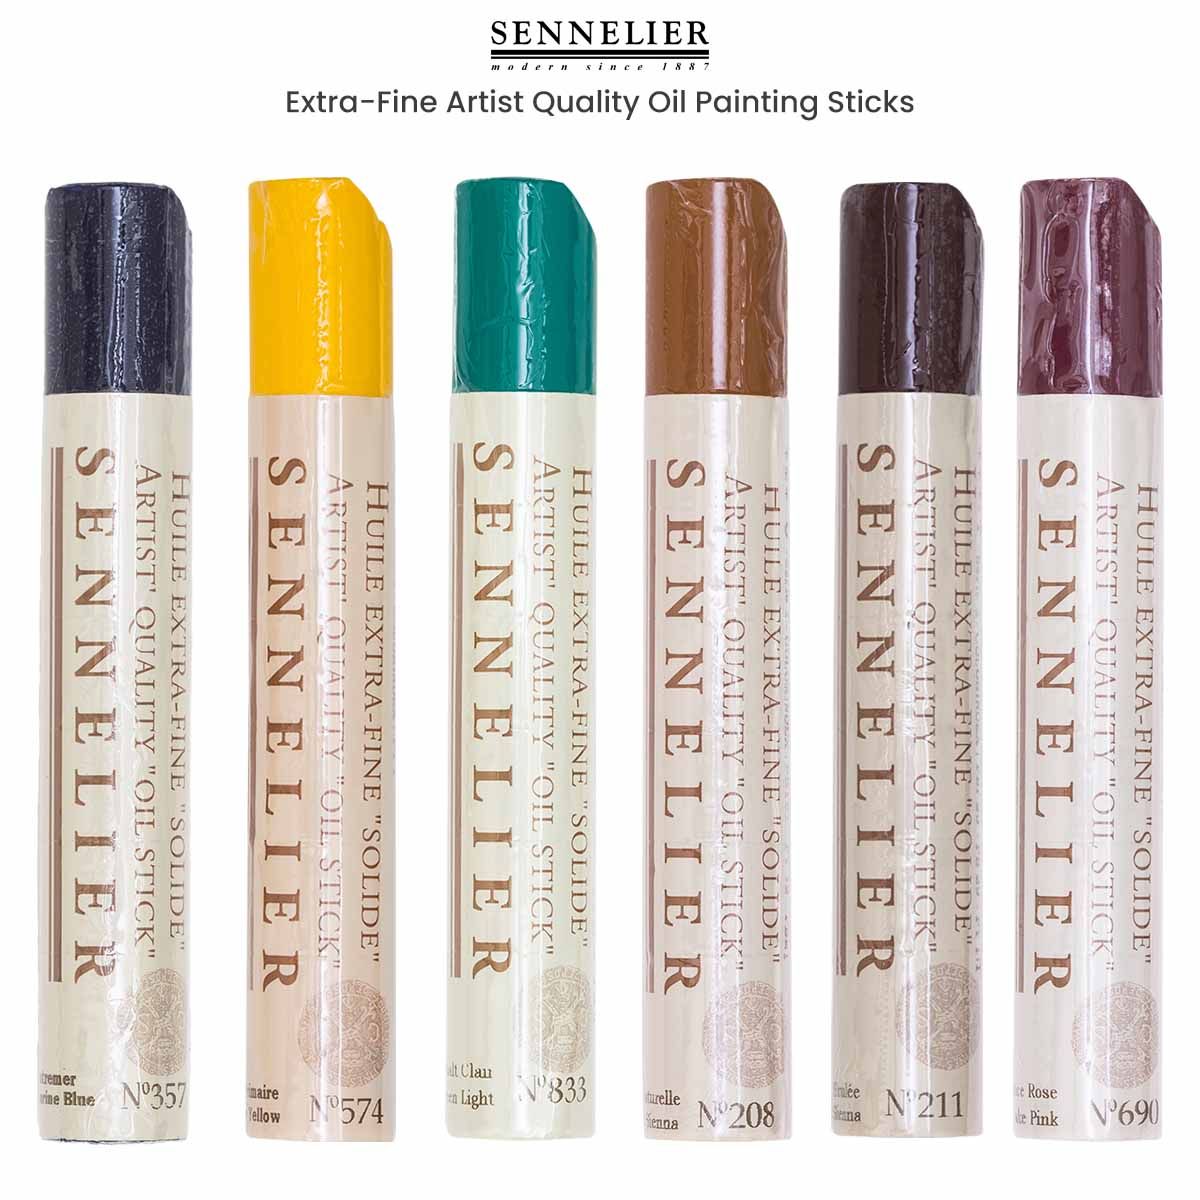 Sennelier Extra-Fine Artist Quality Solid Oil Painting Sticks